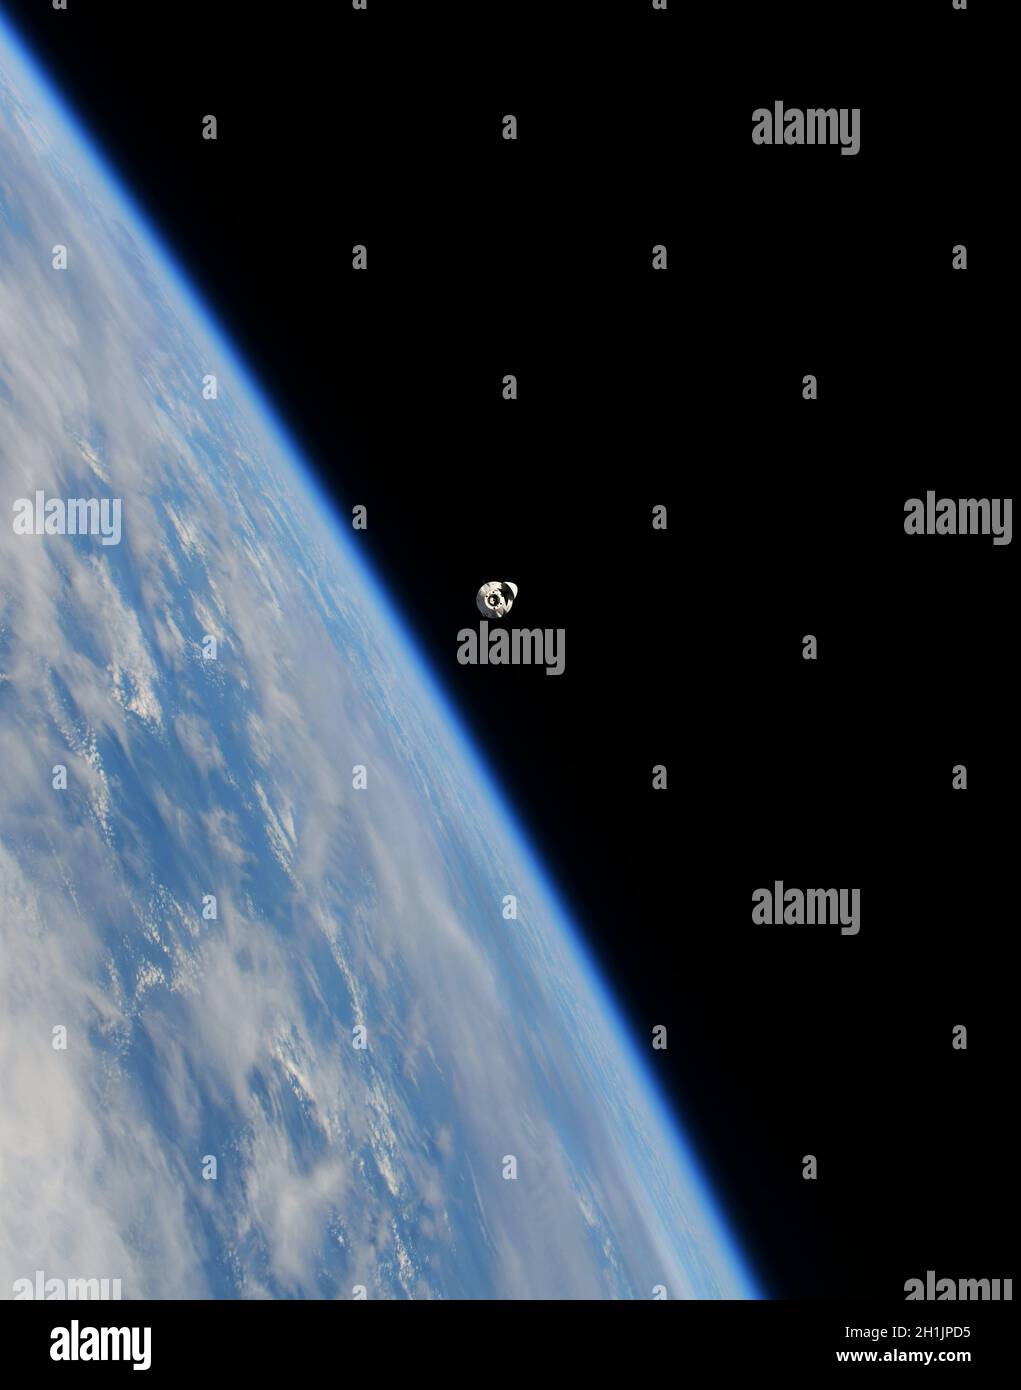 A view of Earth from the International Space Station:  Restocking the ISS and delivering new scientific experiments. Docking of SpaceX vehicles is automated. This spacecraft will return samples and equipment to Earth. An optimised and digitally enhanced version of a NASA/ ESA image. Mandatory Credit: NASA/ESA/T. Pesquet. NB: Usage restrictions: Not to be presented as an endorsement. Stock Photo